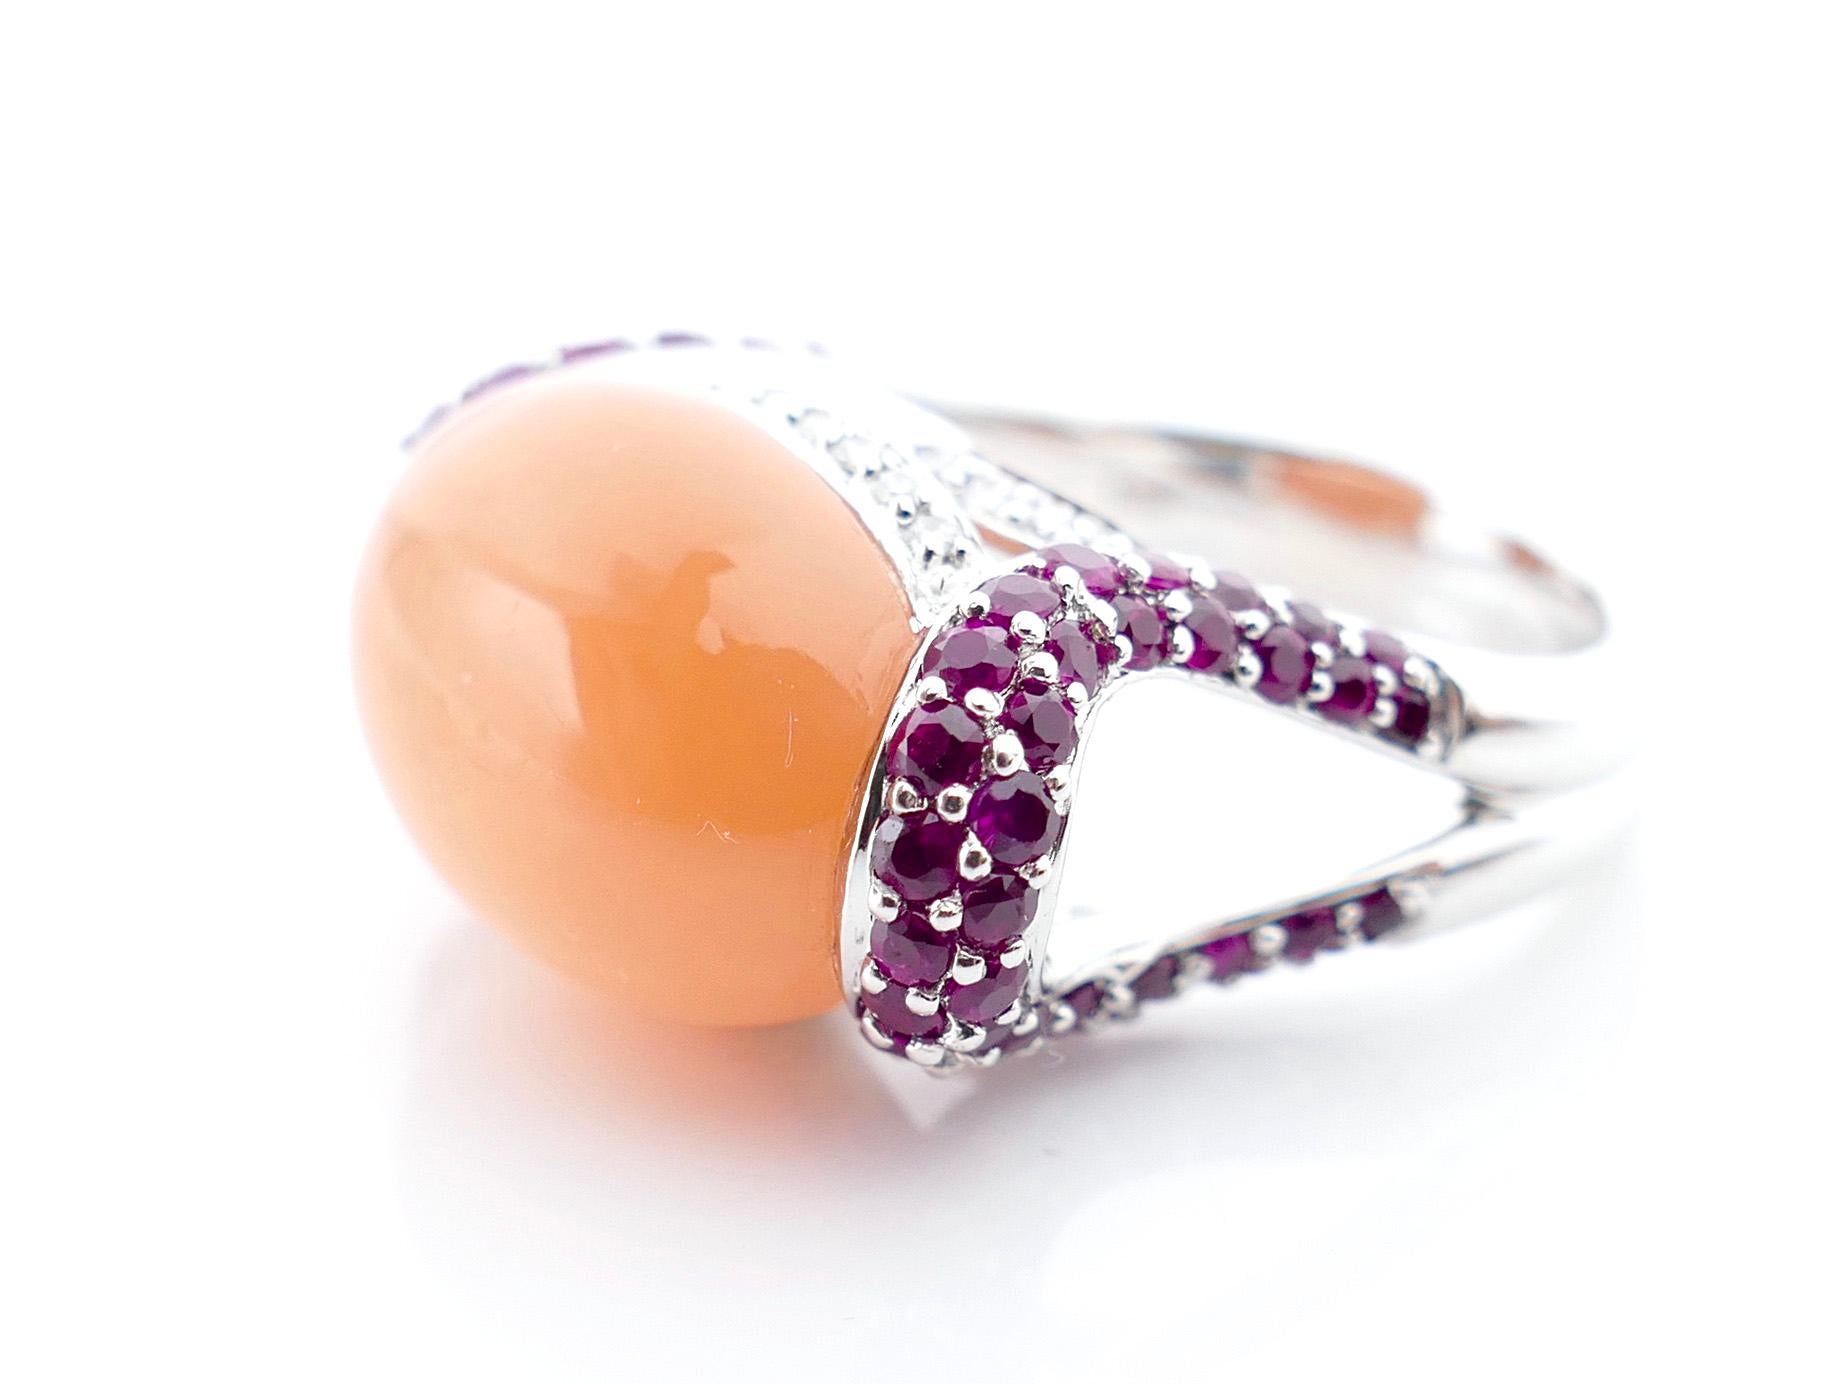 This stylish peach Carnelian cabochon ring makes an unforgettable fashion statement. With 70 pave-set Rubies and 32 pave-set Diamonds, weighing in at 2 Carats total, the ring shines with color. The base is made of 14K White Gold and has an open,